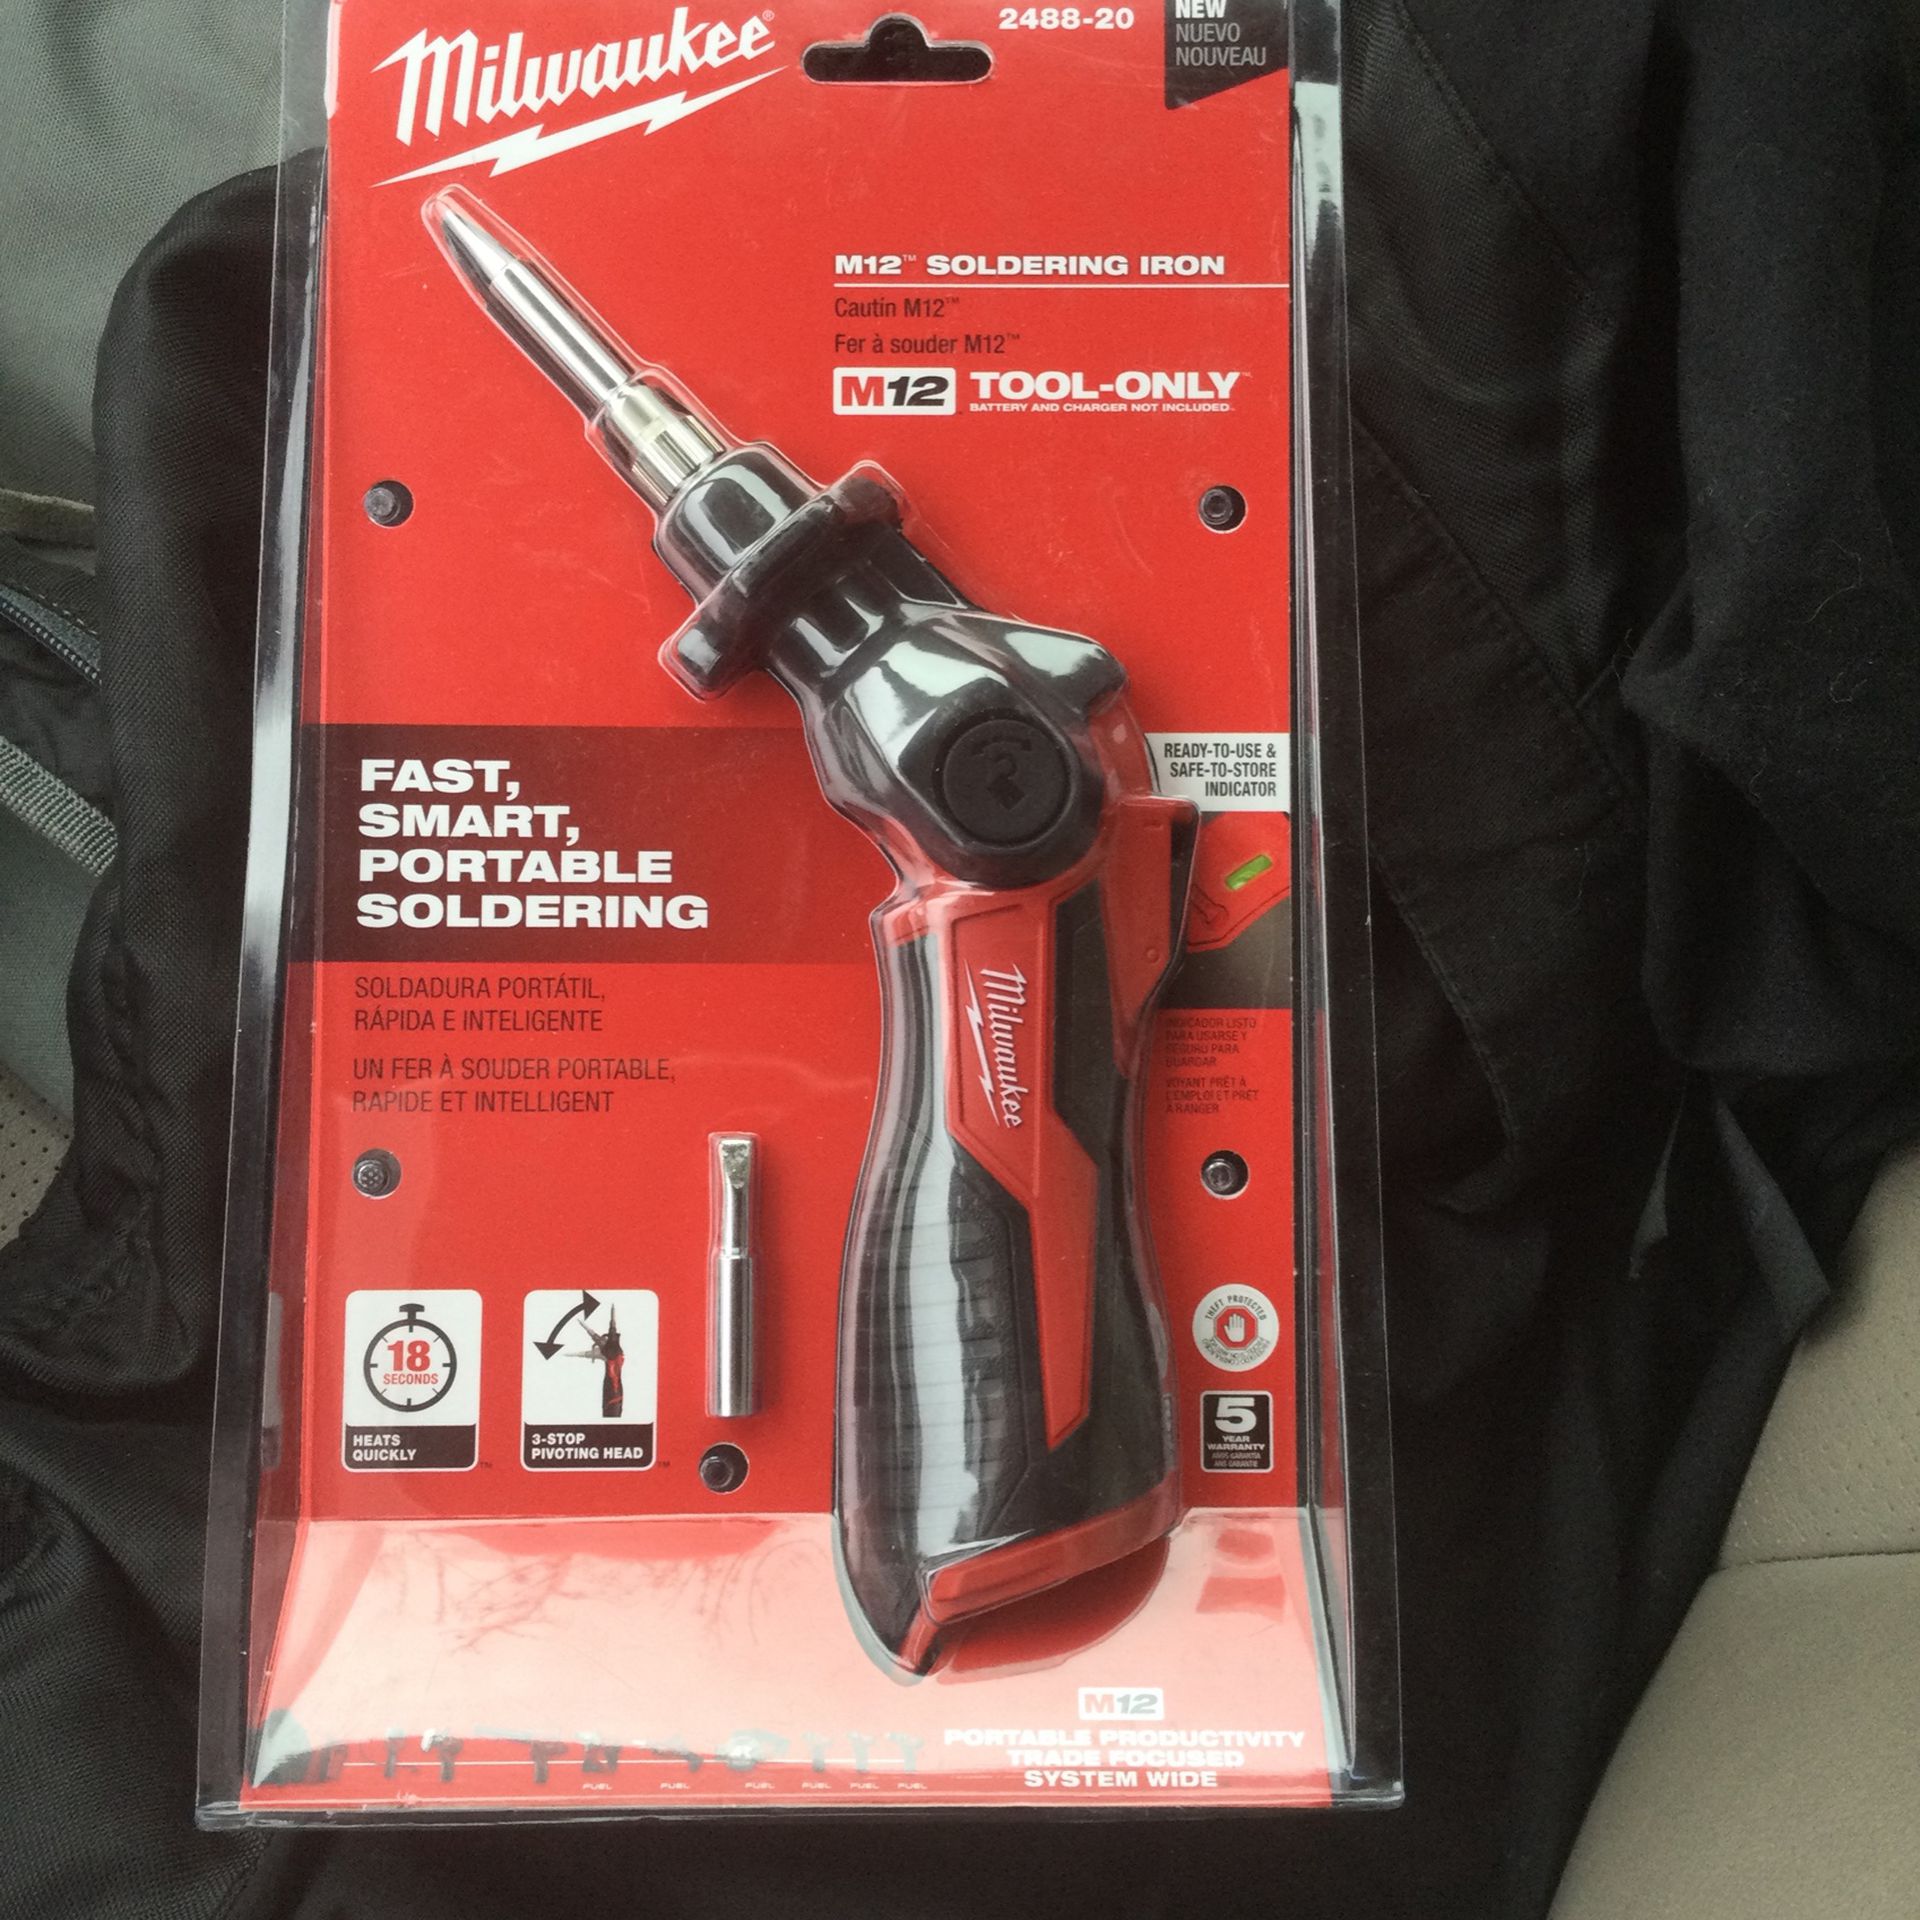 M12 12-Volt Lithium-Ion Cordless Soldering Iron with Soldering Iron Chisel Tip - Brand New!